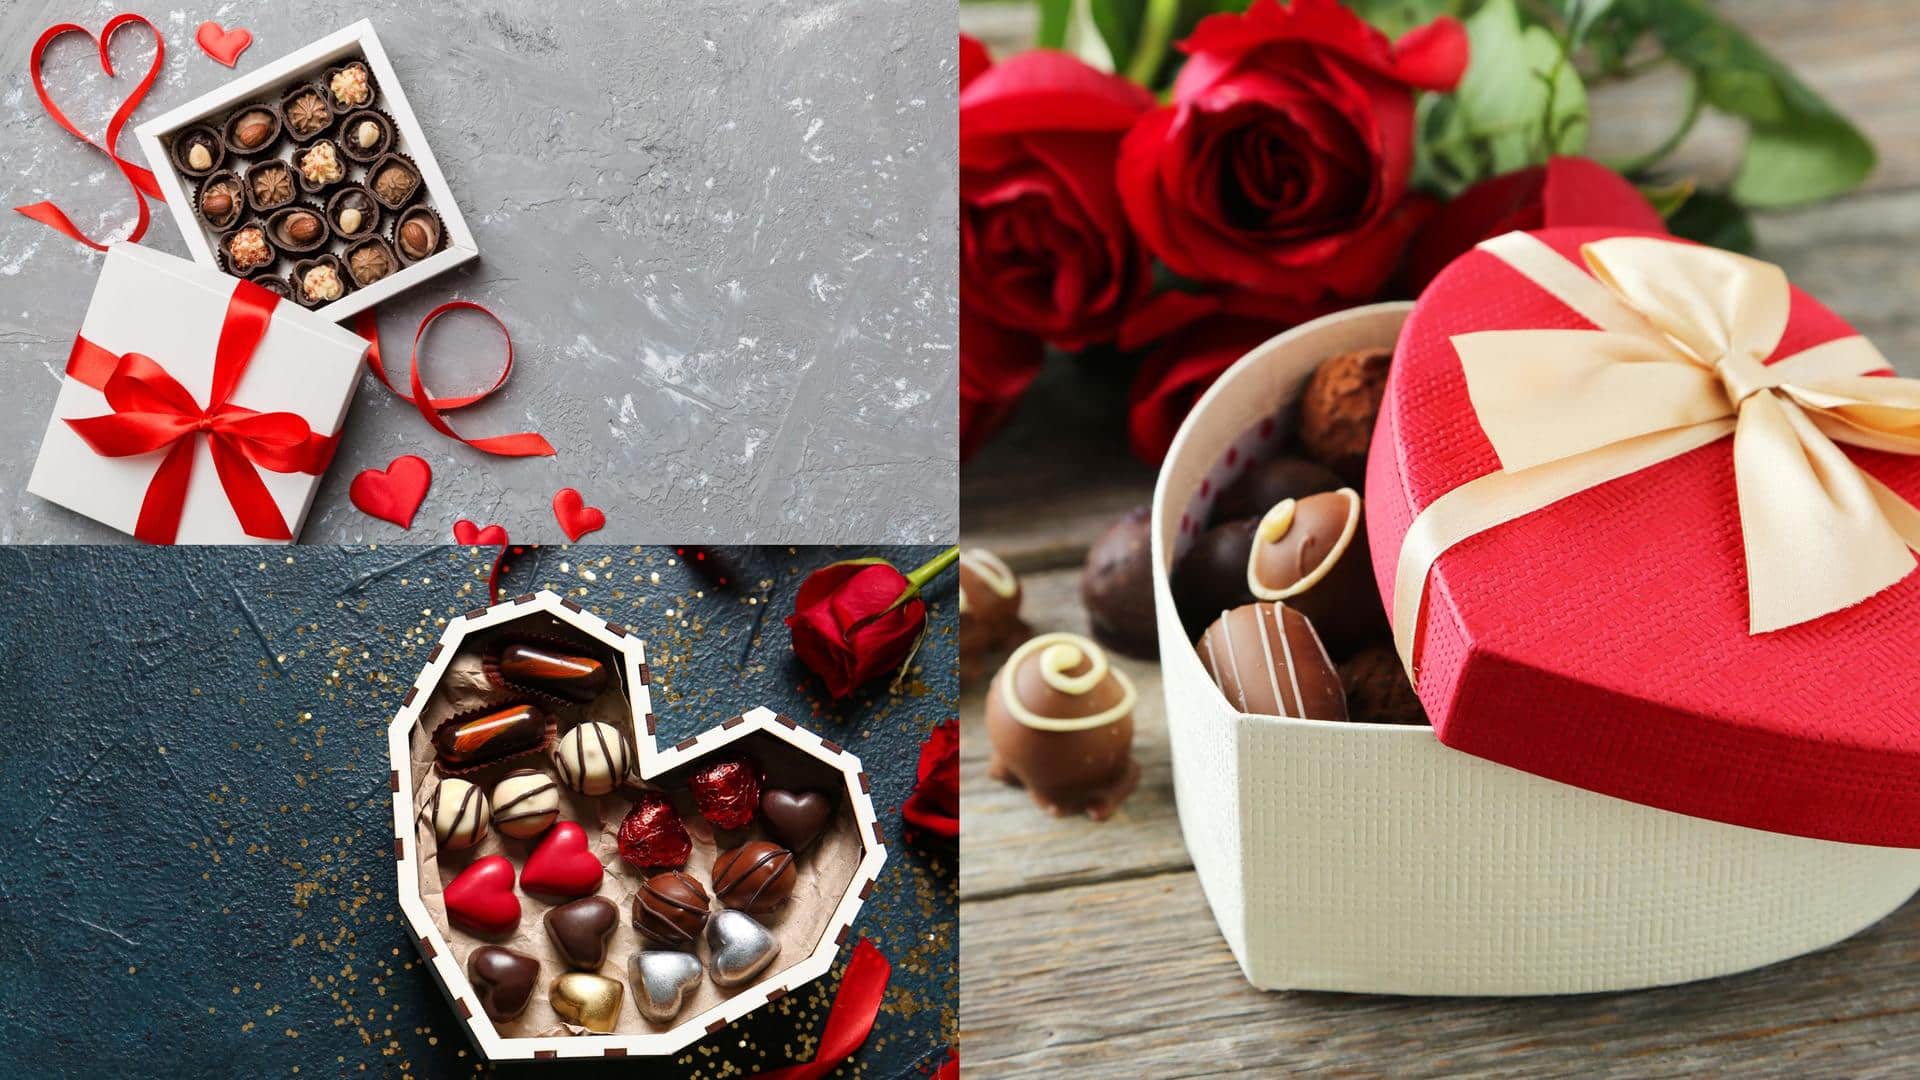 Valentine's Day: Surprise your bae with this homemade chocolate box